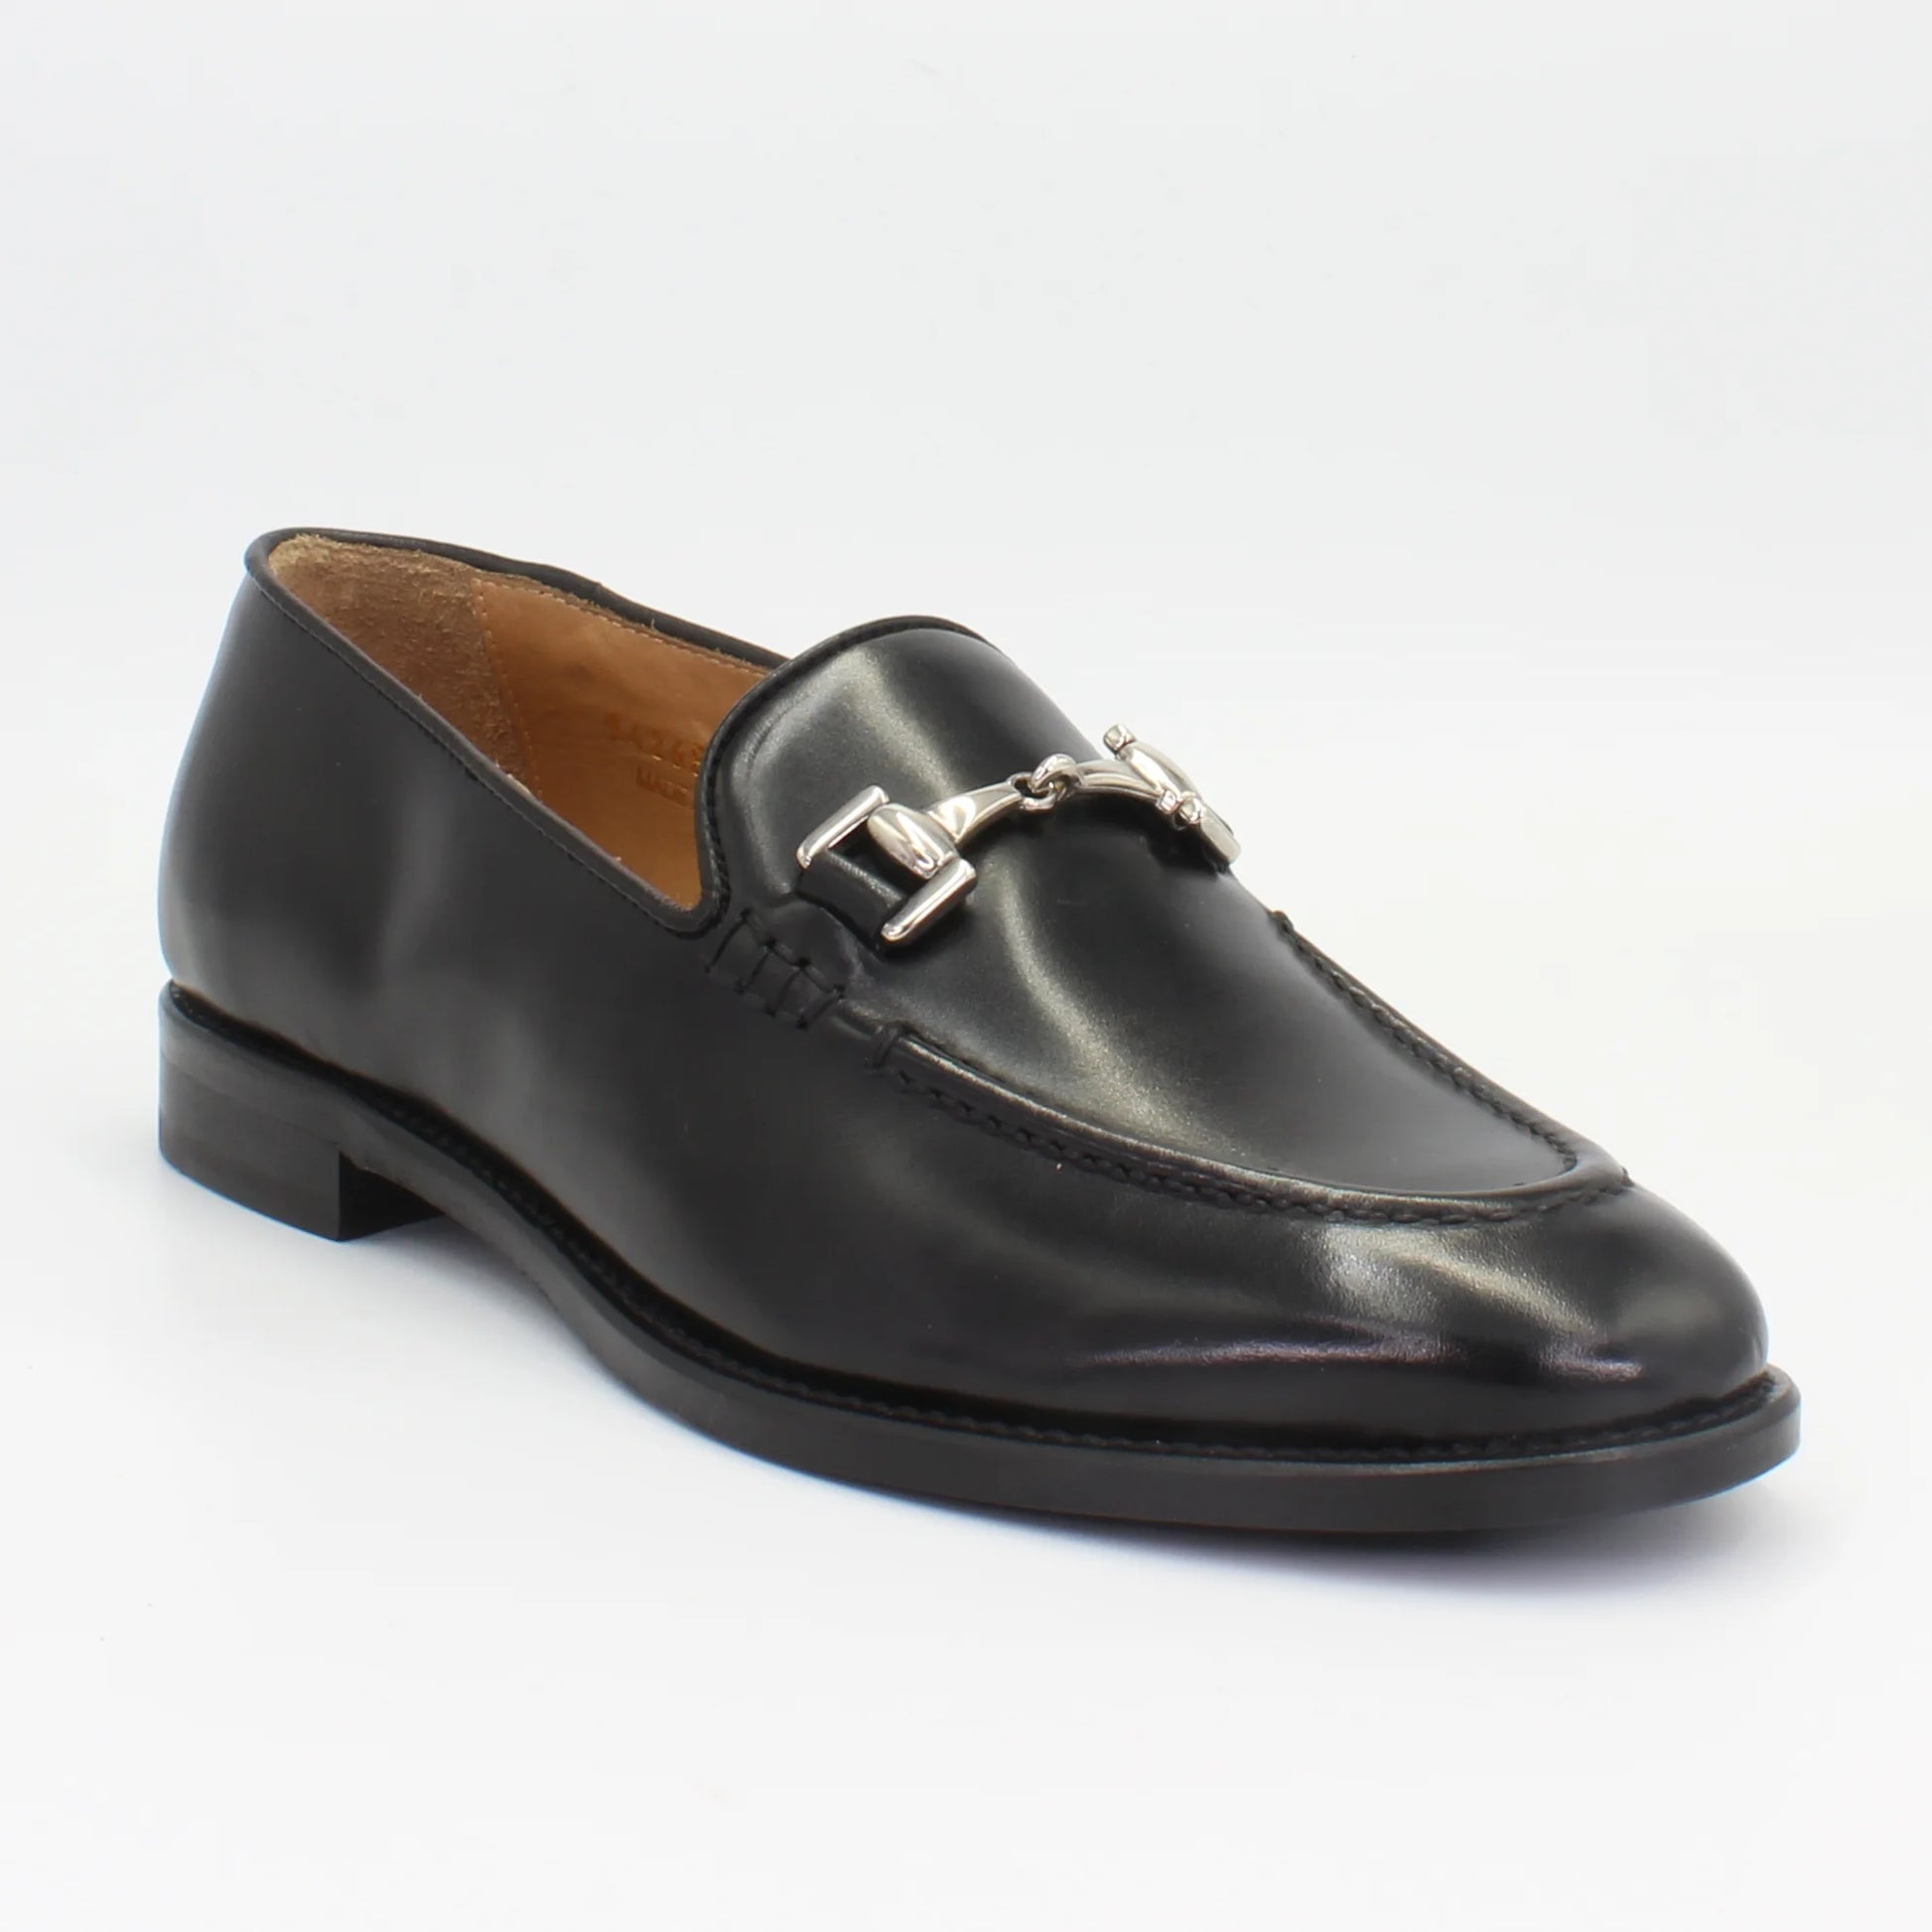 Shop Handmade Italian Leather Moccasin in Nero (BRD9426) or browse our range of hand-made Italian shoes for women in leather or suede in-store at Aliverti Cape Town, or shop online. We deliver in South Africa & offer multiple payment plans as well as accept multiple safe & secure payment methods.